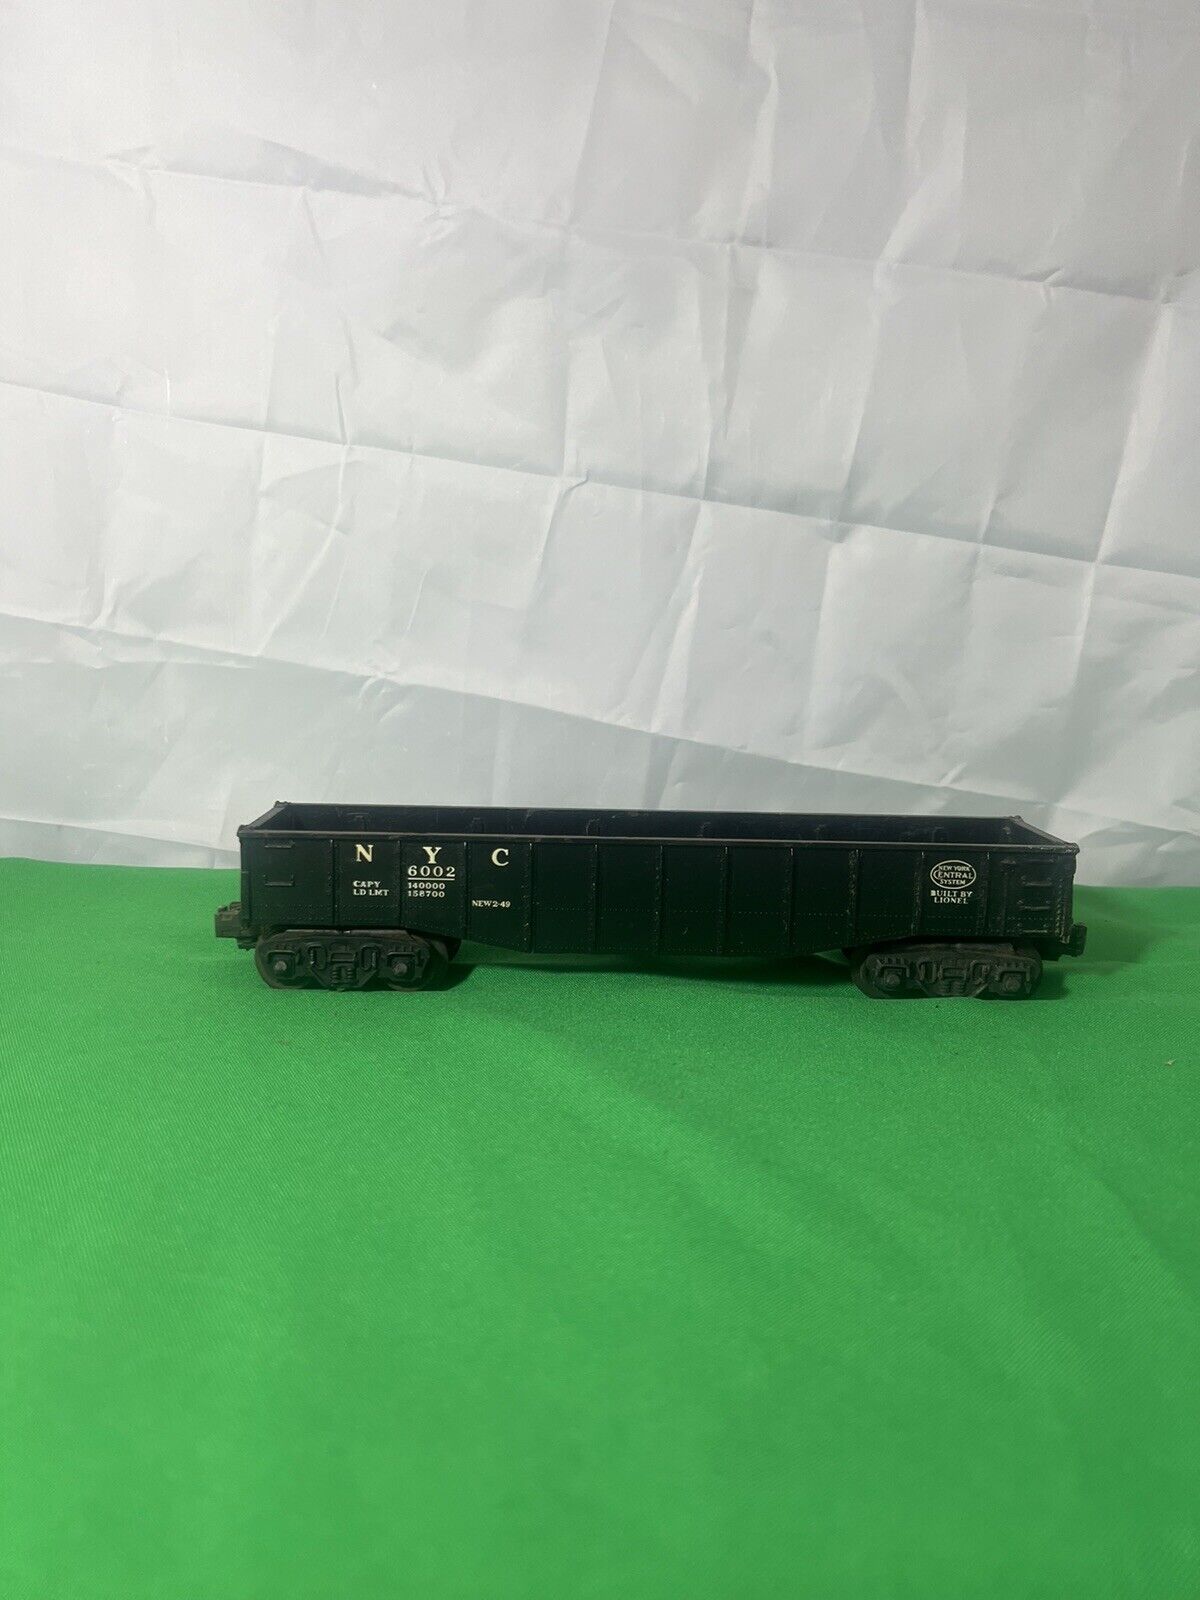 Vintage Lionell Train Oh Scale Number  6002